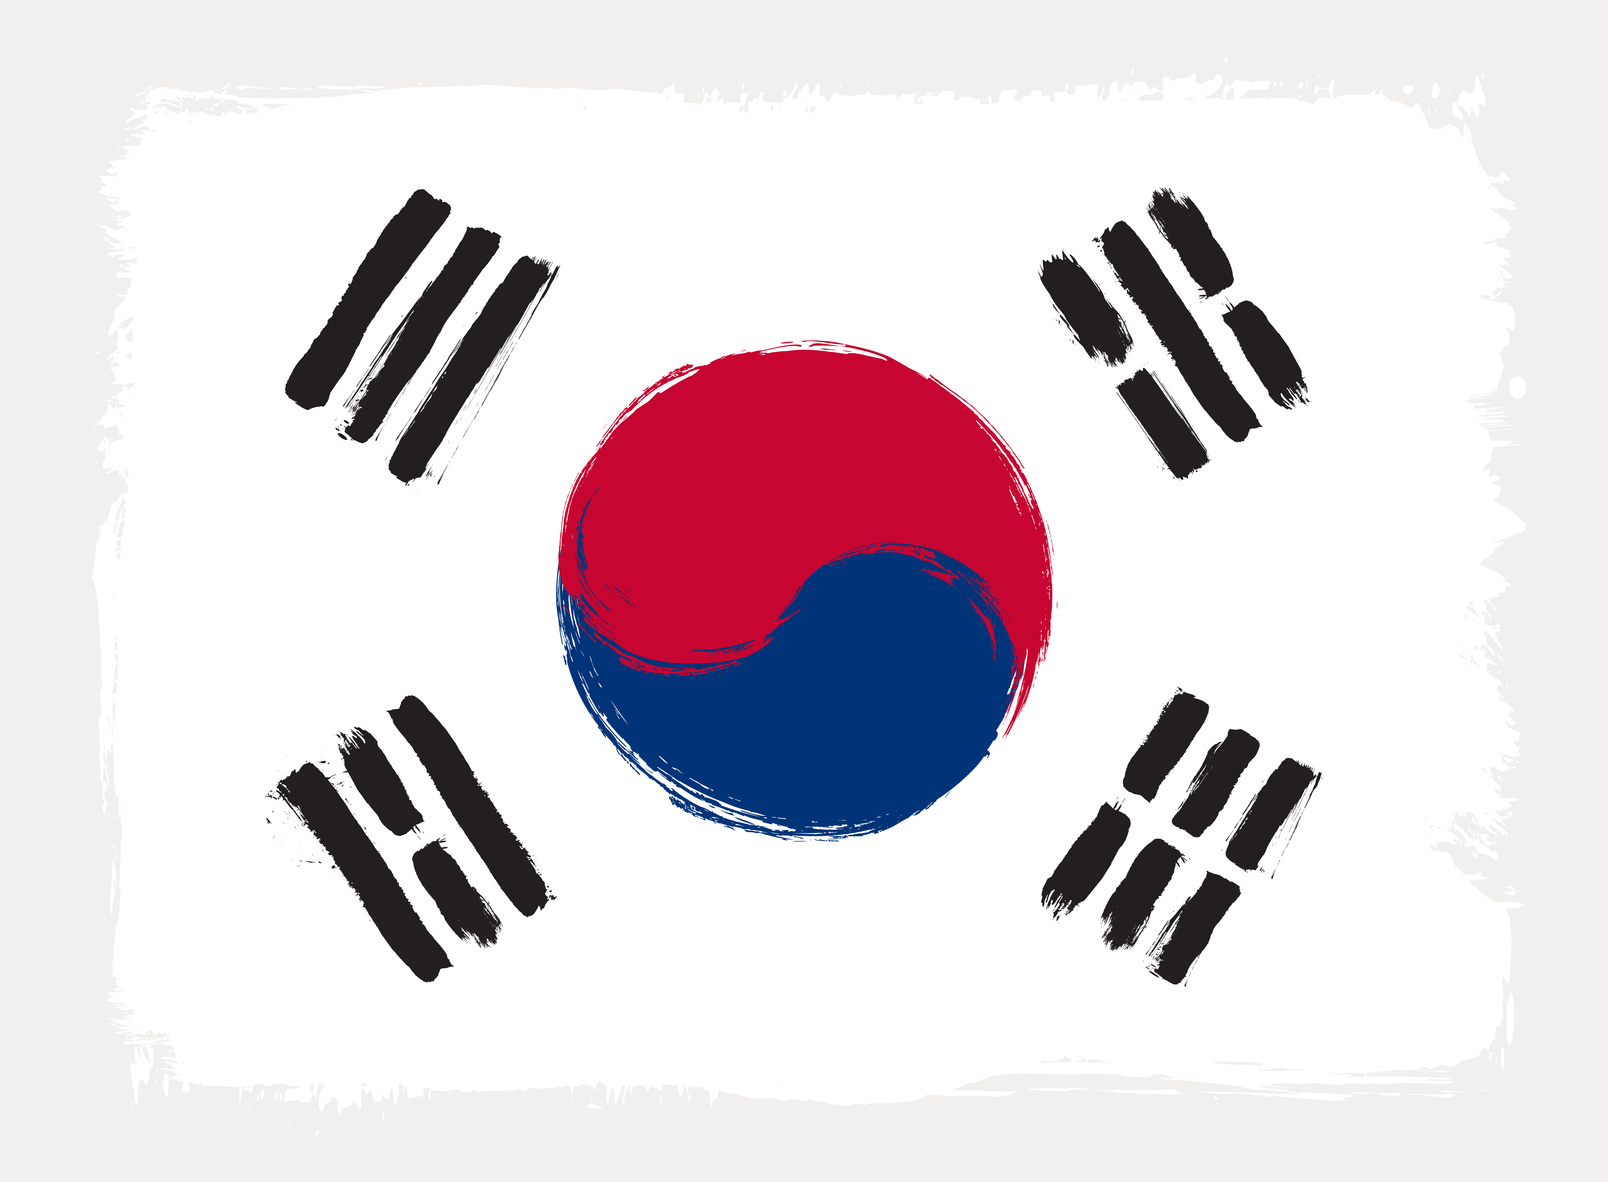 "Fintech is a chief industry that will lead Korea’s future"